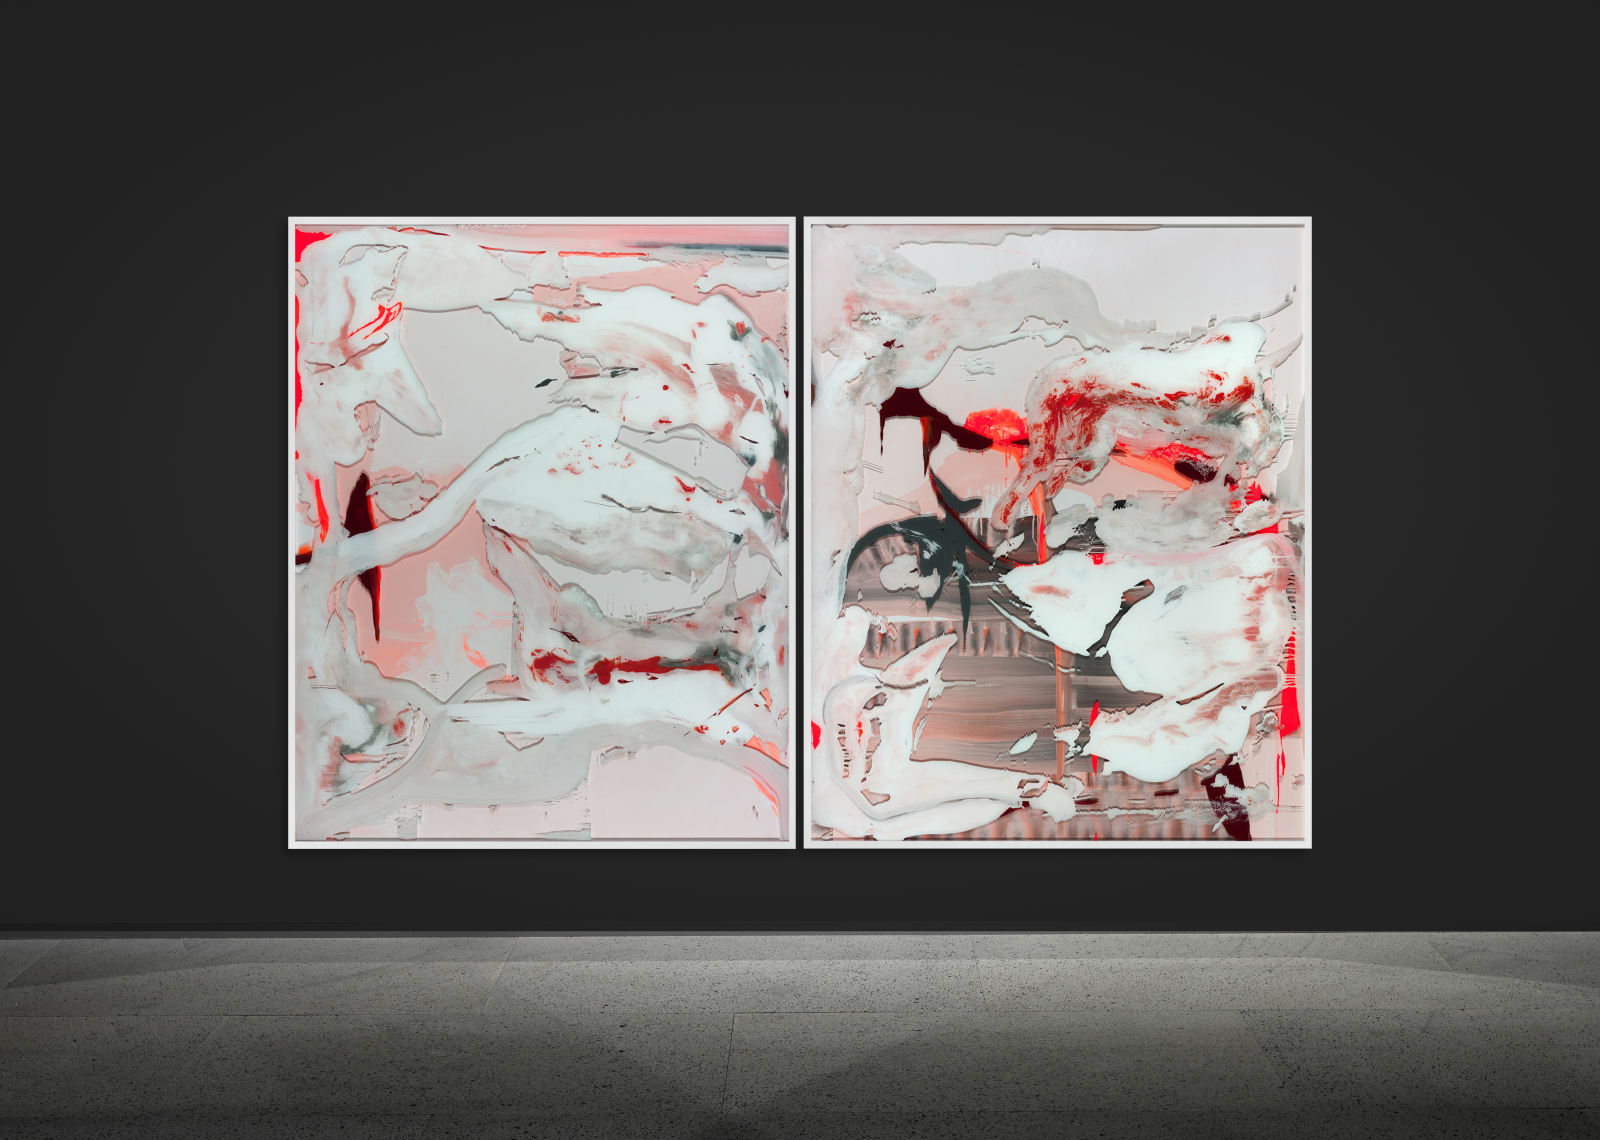 Michael Müller, Nr. 3 & 4, The shoulder on which to bear time, 2019-2020